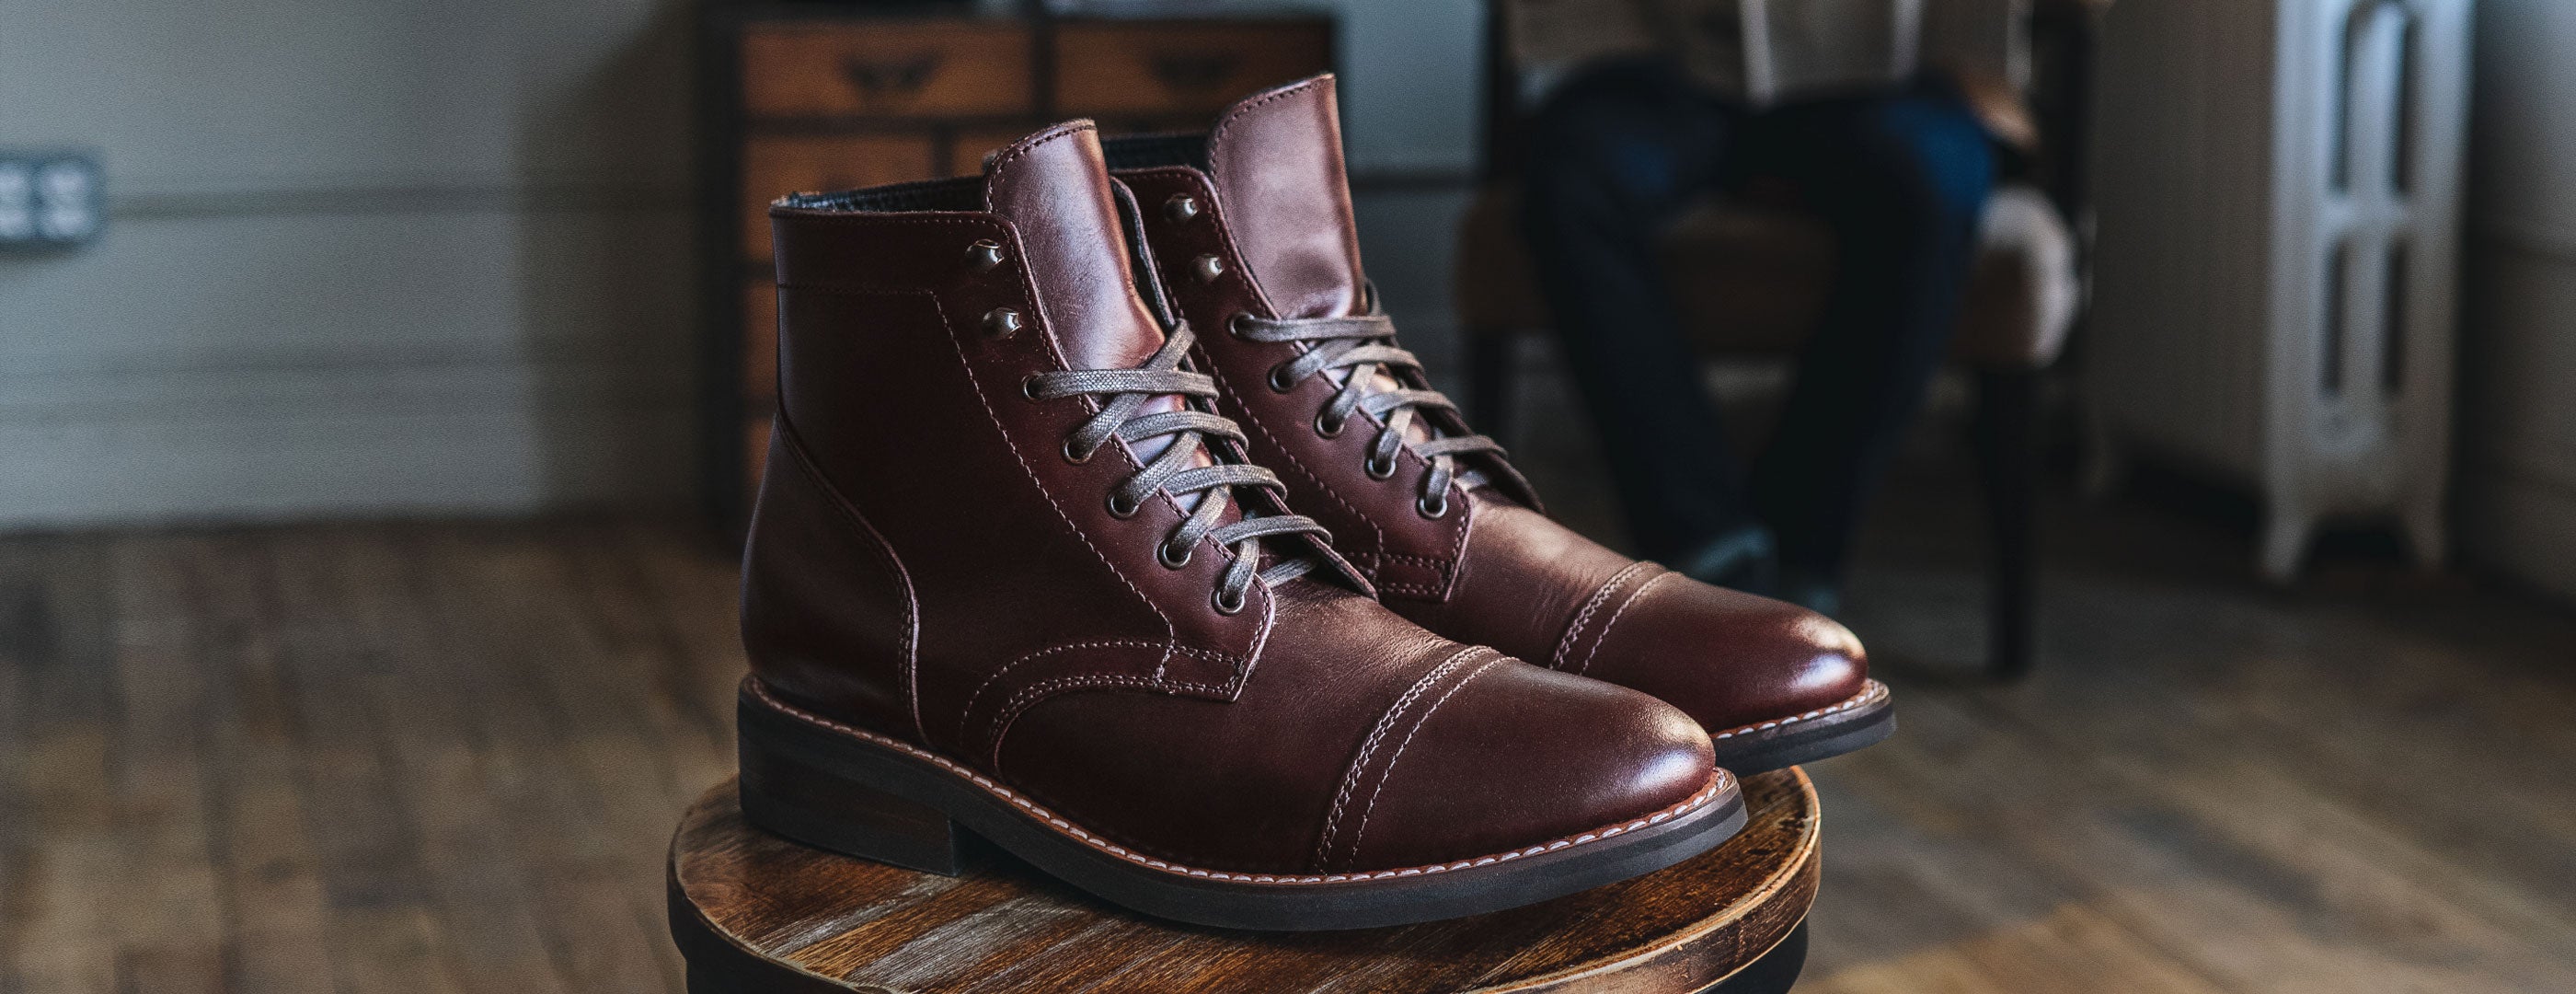 Goodyear Welt Construction: Why It Matters